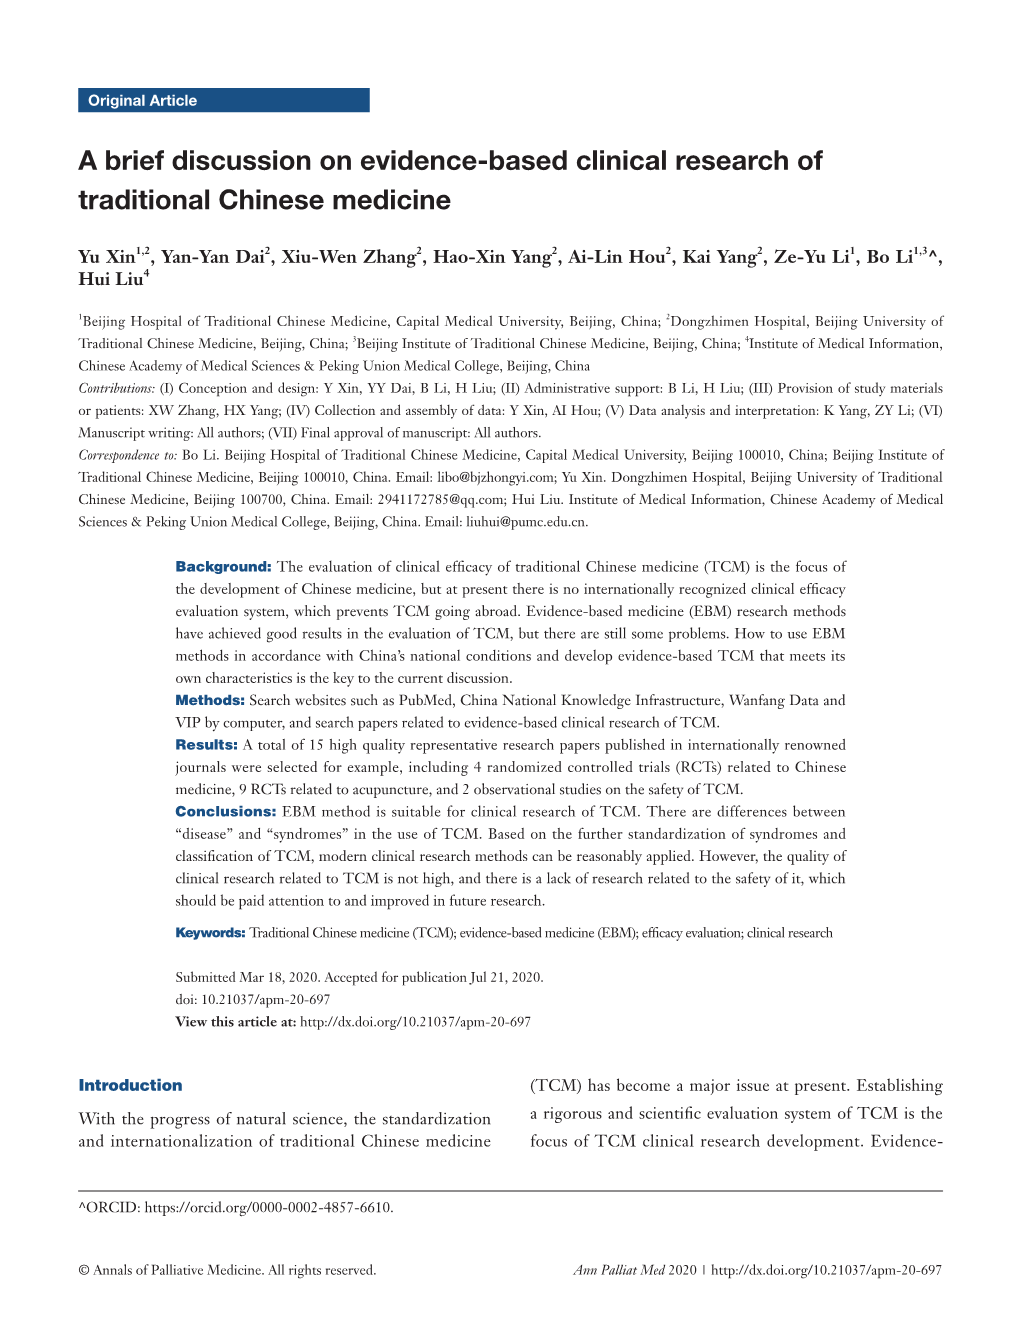 A Brief Discussion on Evidence-Based Clinical Research of Traditional Chinese Medicine